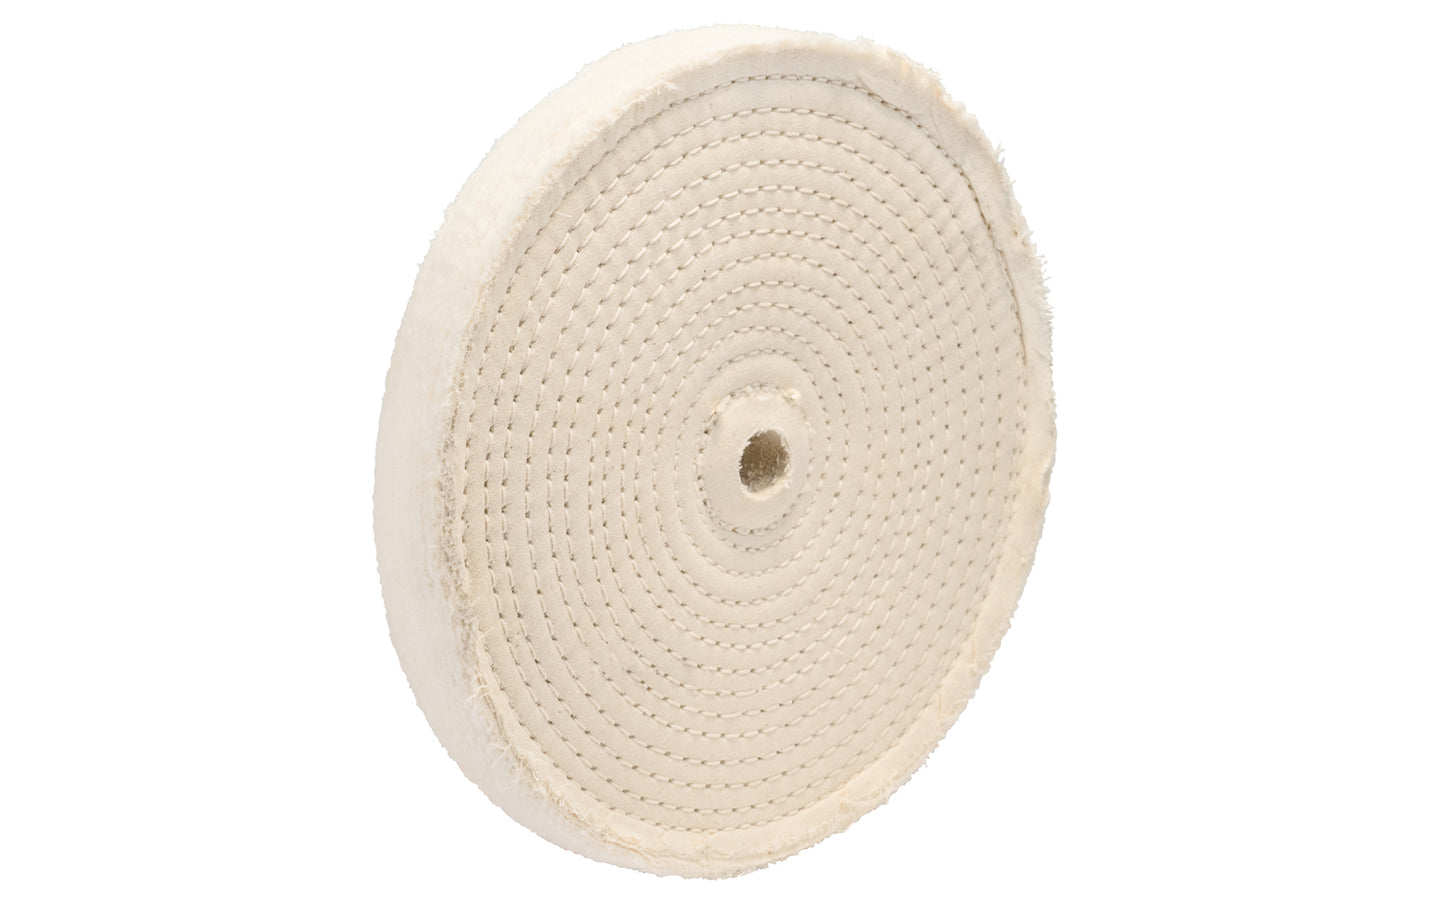 8" Spiral Sewn Buffing Wheel ~ 1" Thick is a workhorse for aggressive cutting & coarse buffing. 5/8" hole diameter. 1" wide thickness. Spiral sewn wheel for prolong service. For coarse cutting & buffing, & flexible grinding. Stiffer cotton sheeting held together with 1/4" wide spiral sewn lockstitch sewing. Dico Polishing Company 528-80-8. Made in USA.